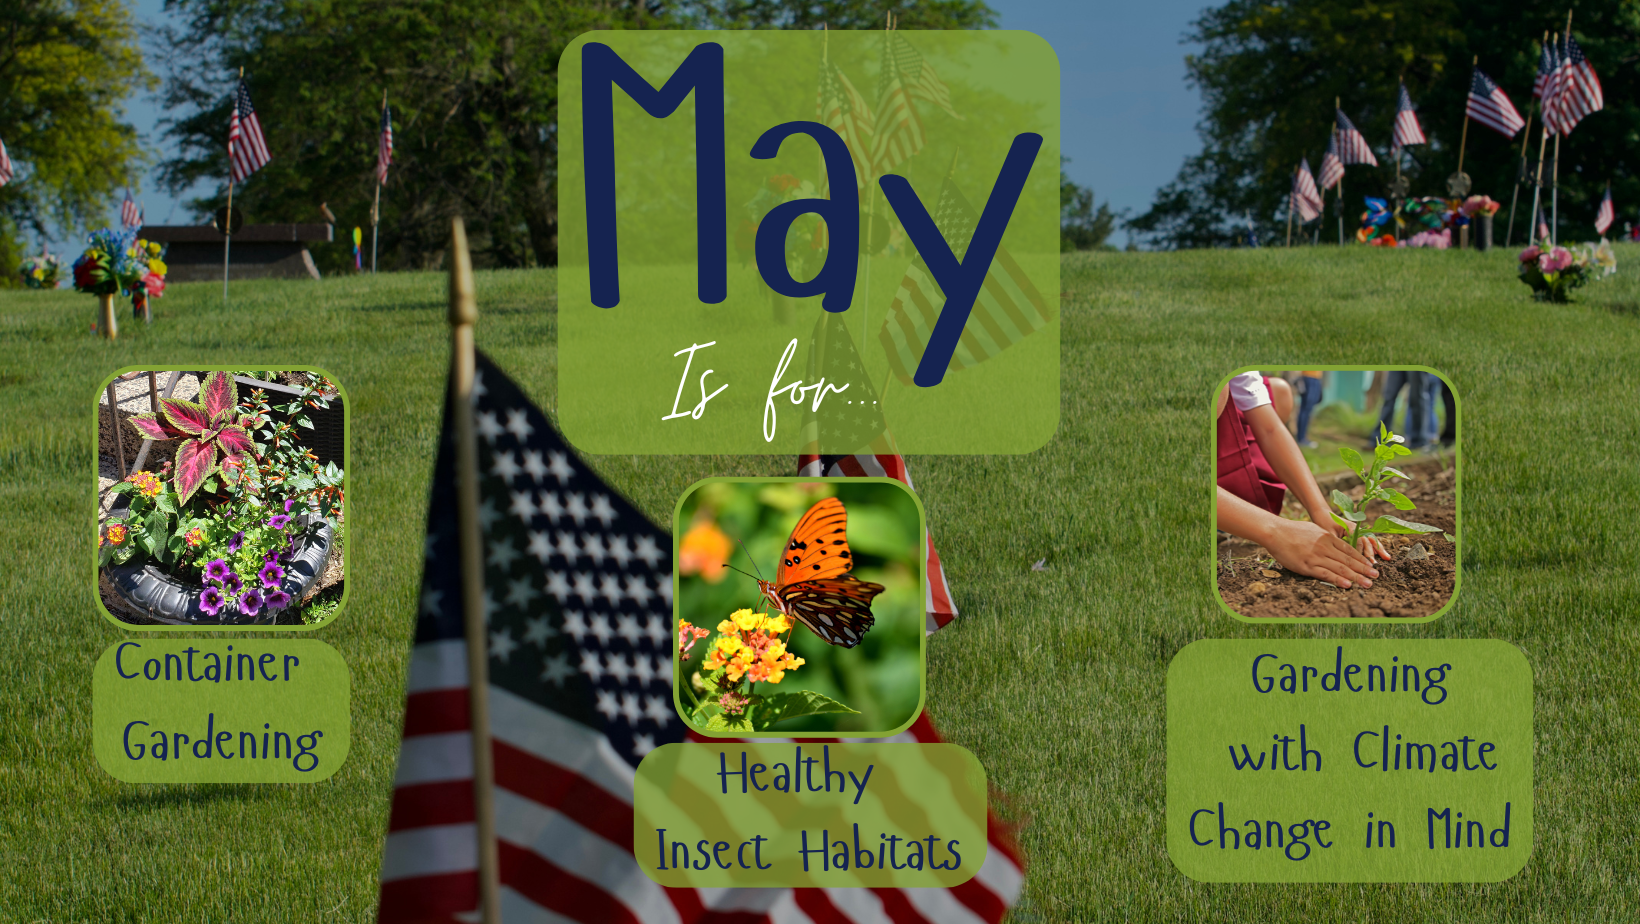 May is for Container Gardening, Healthy Insect Habitats & Gardening with Climate Change in Mind